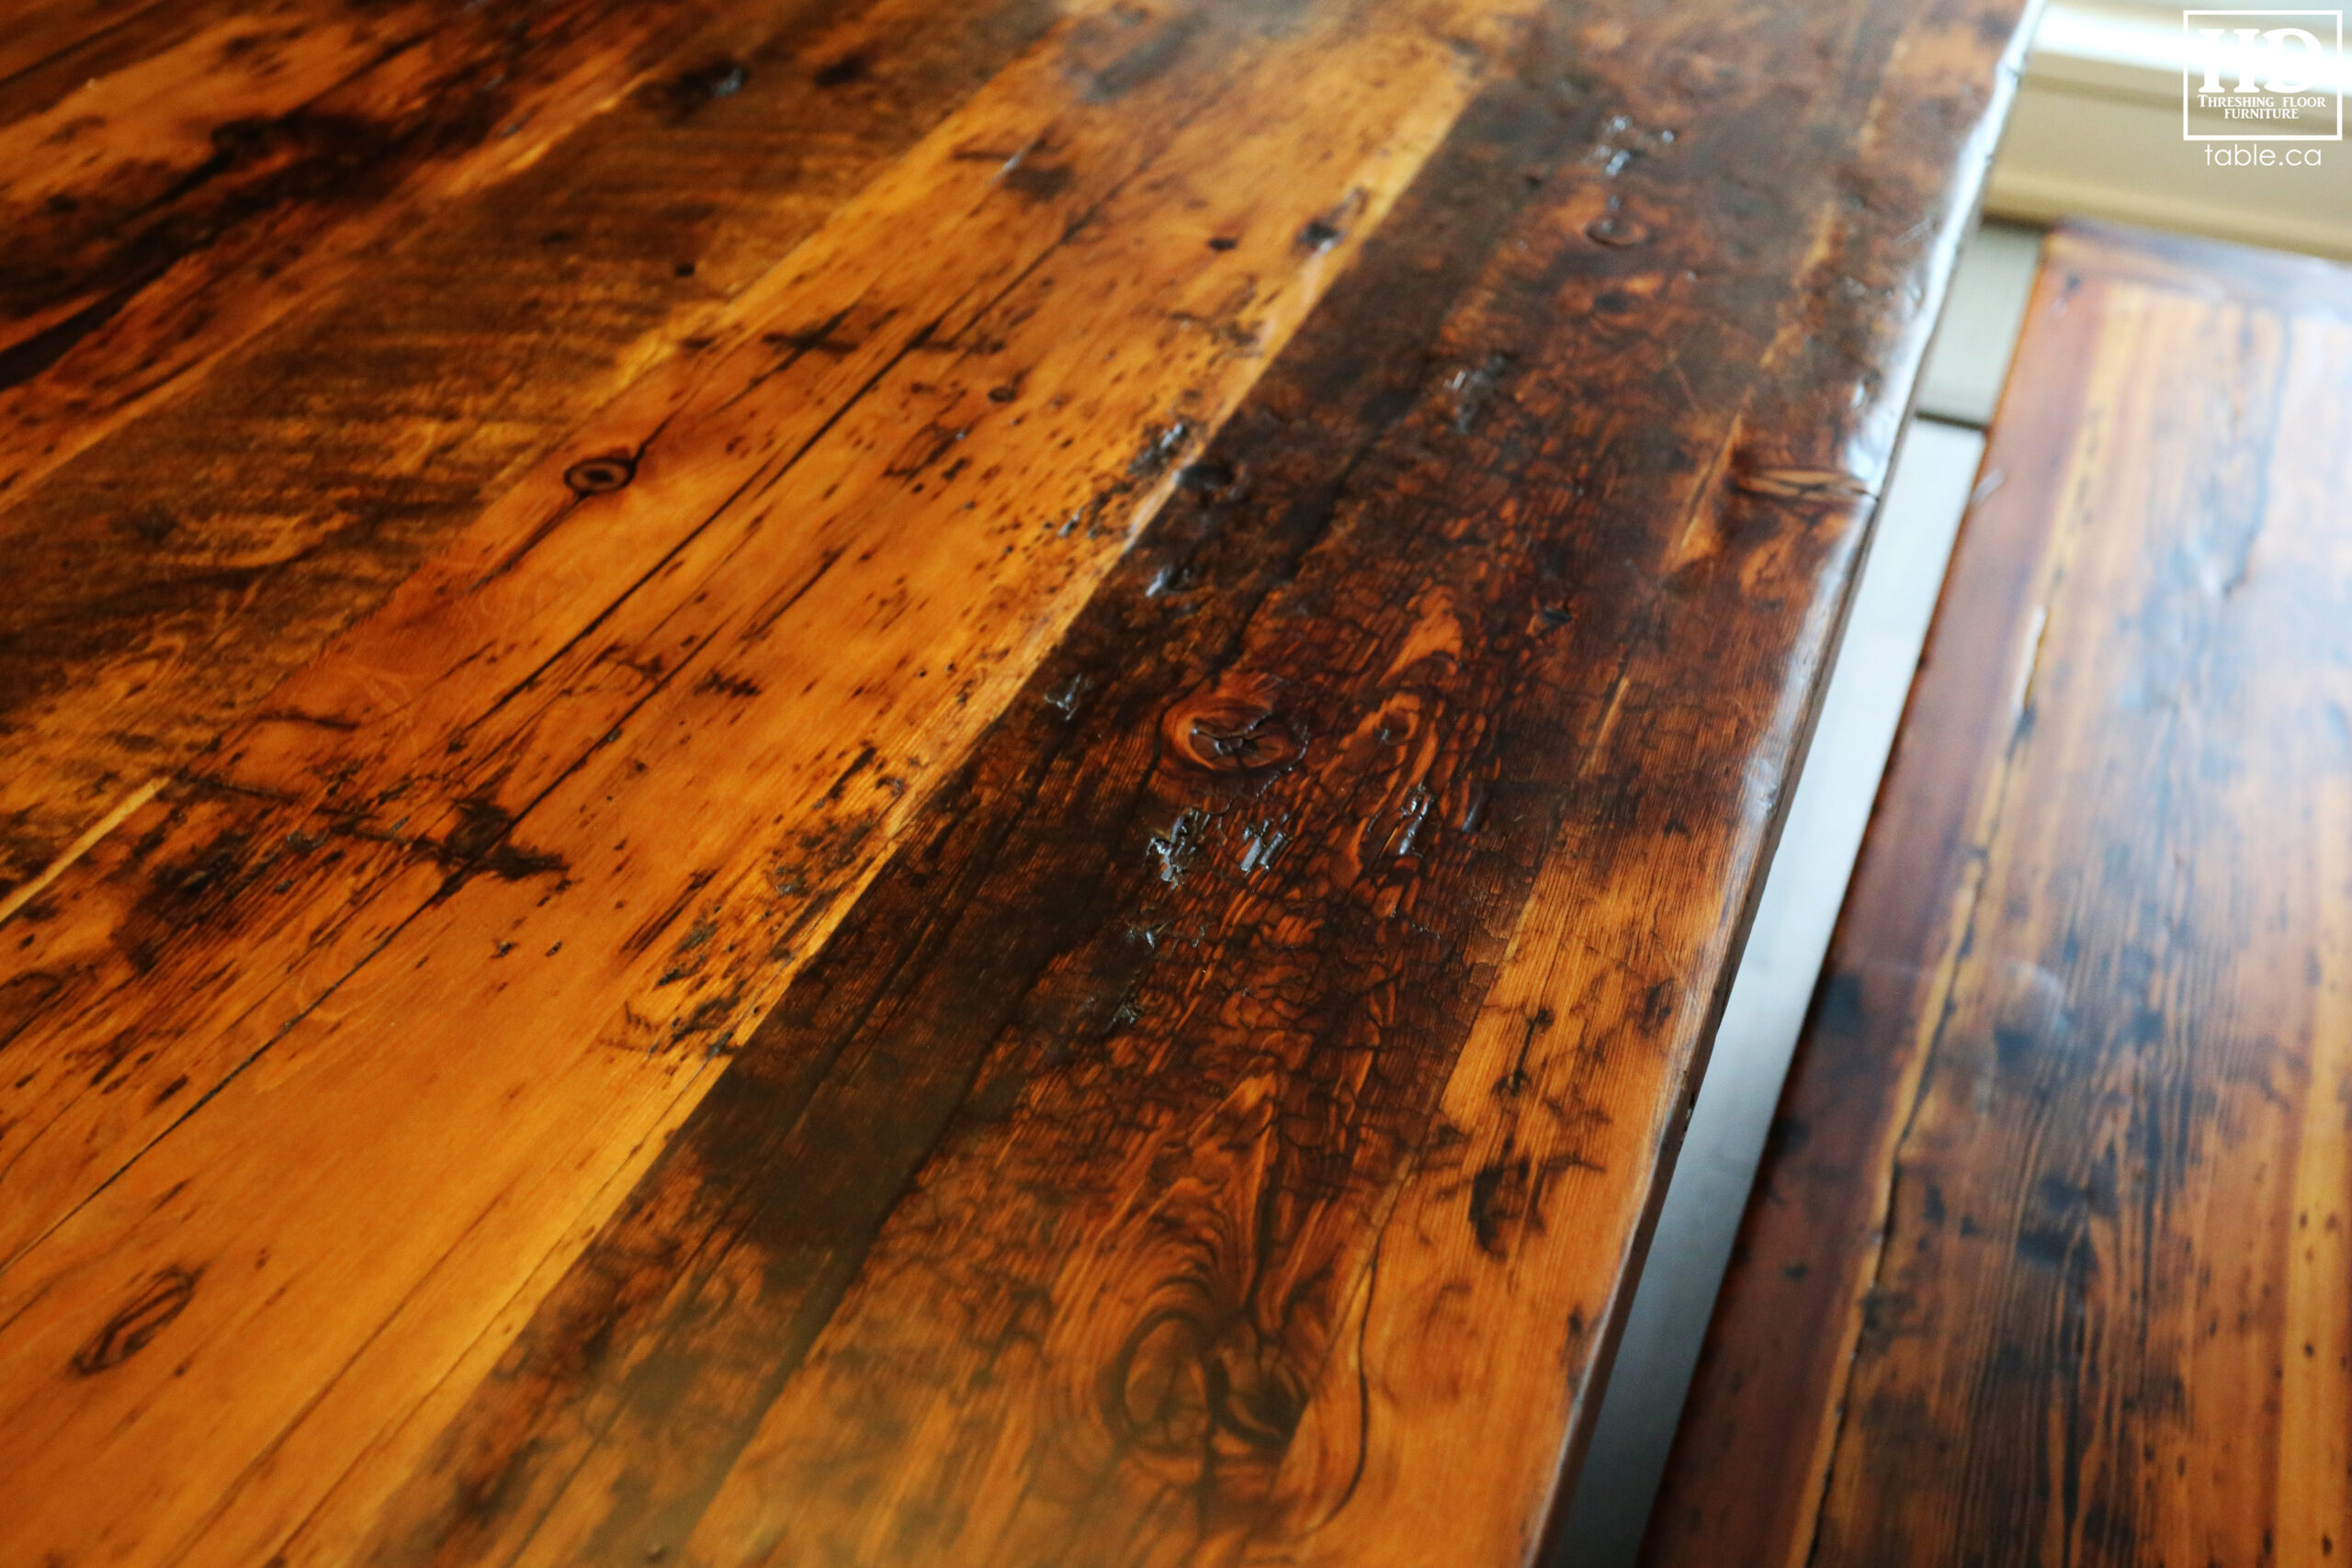 Rustic Table with Light Epoxy Coating Option by HD Threshing Floor Furniture / www.table.ca